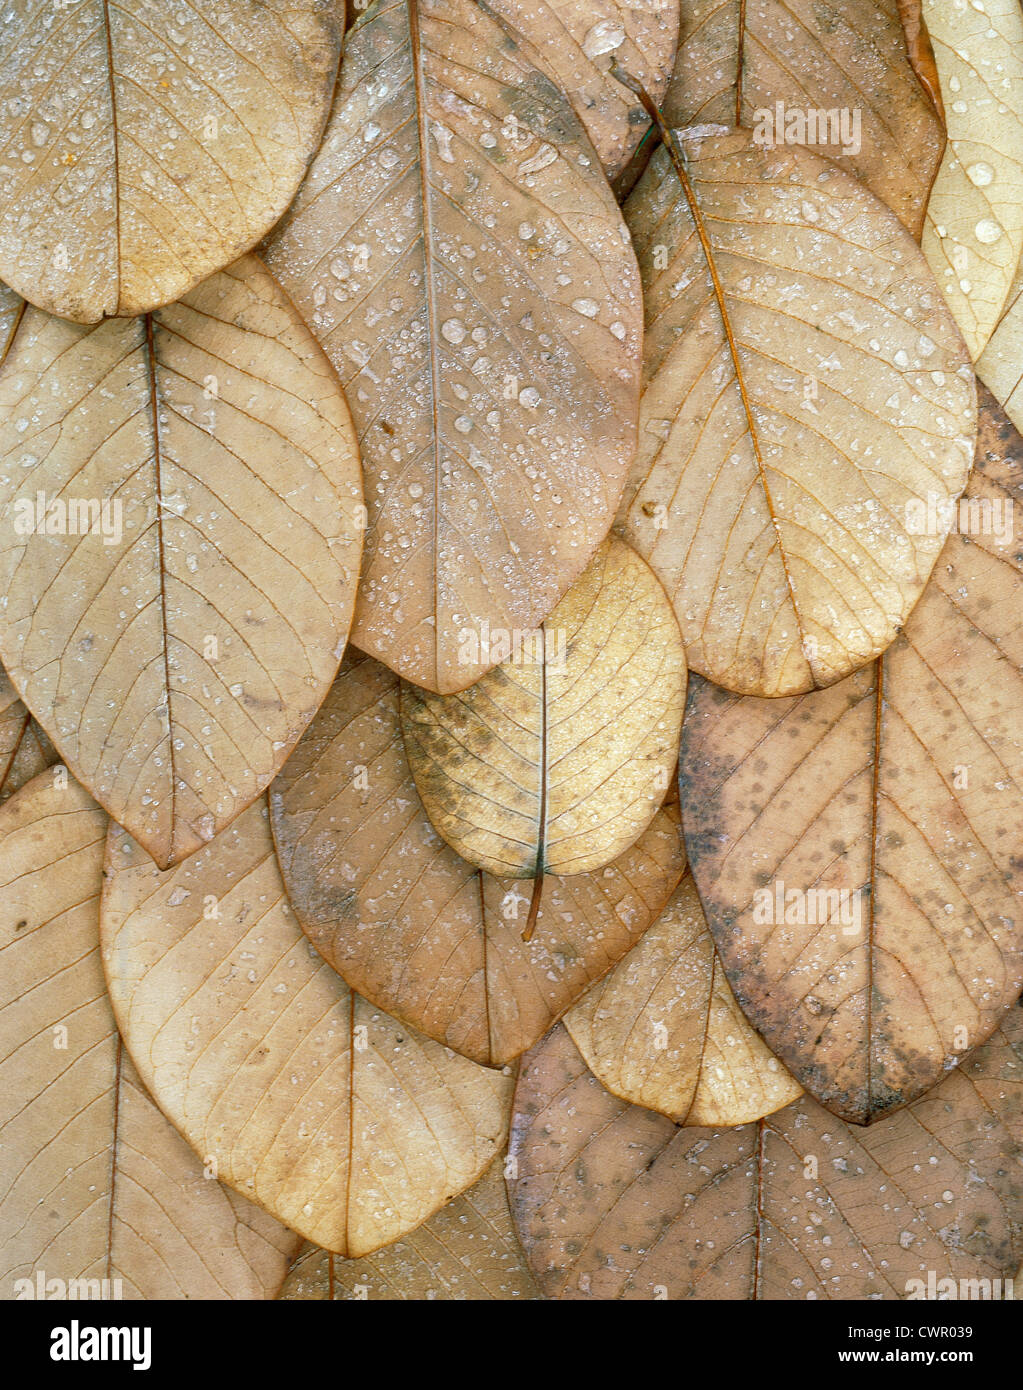 Autumn leaf, arrangement of brown overlapping leaves. Stock Photo